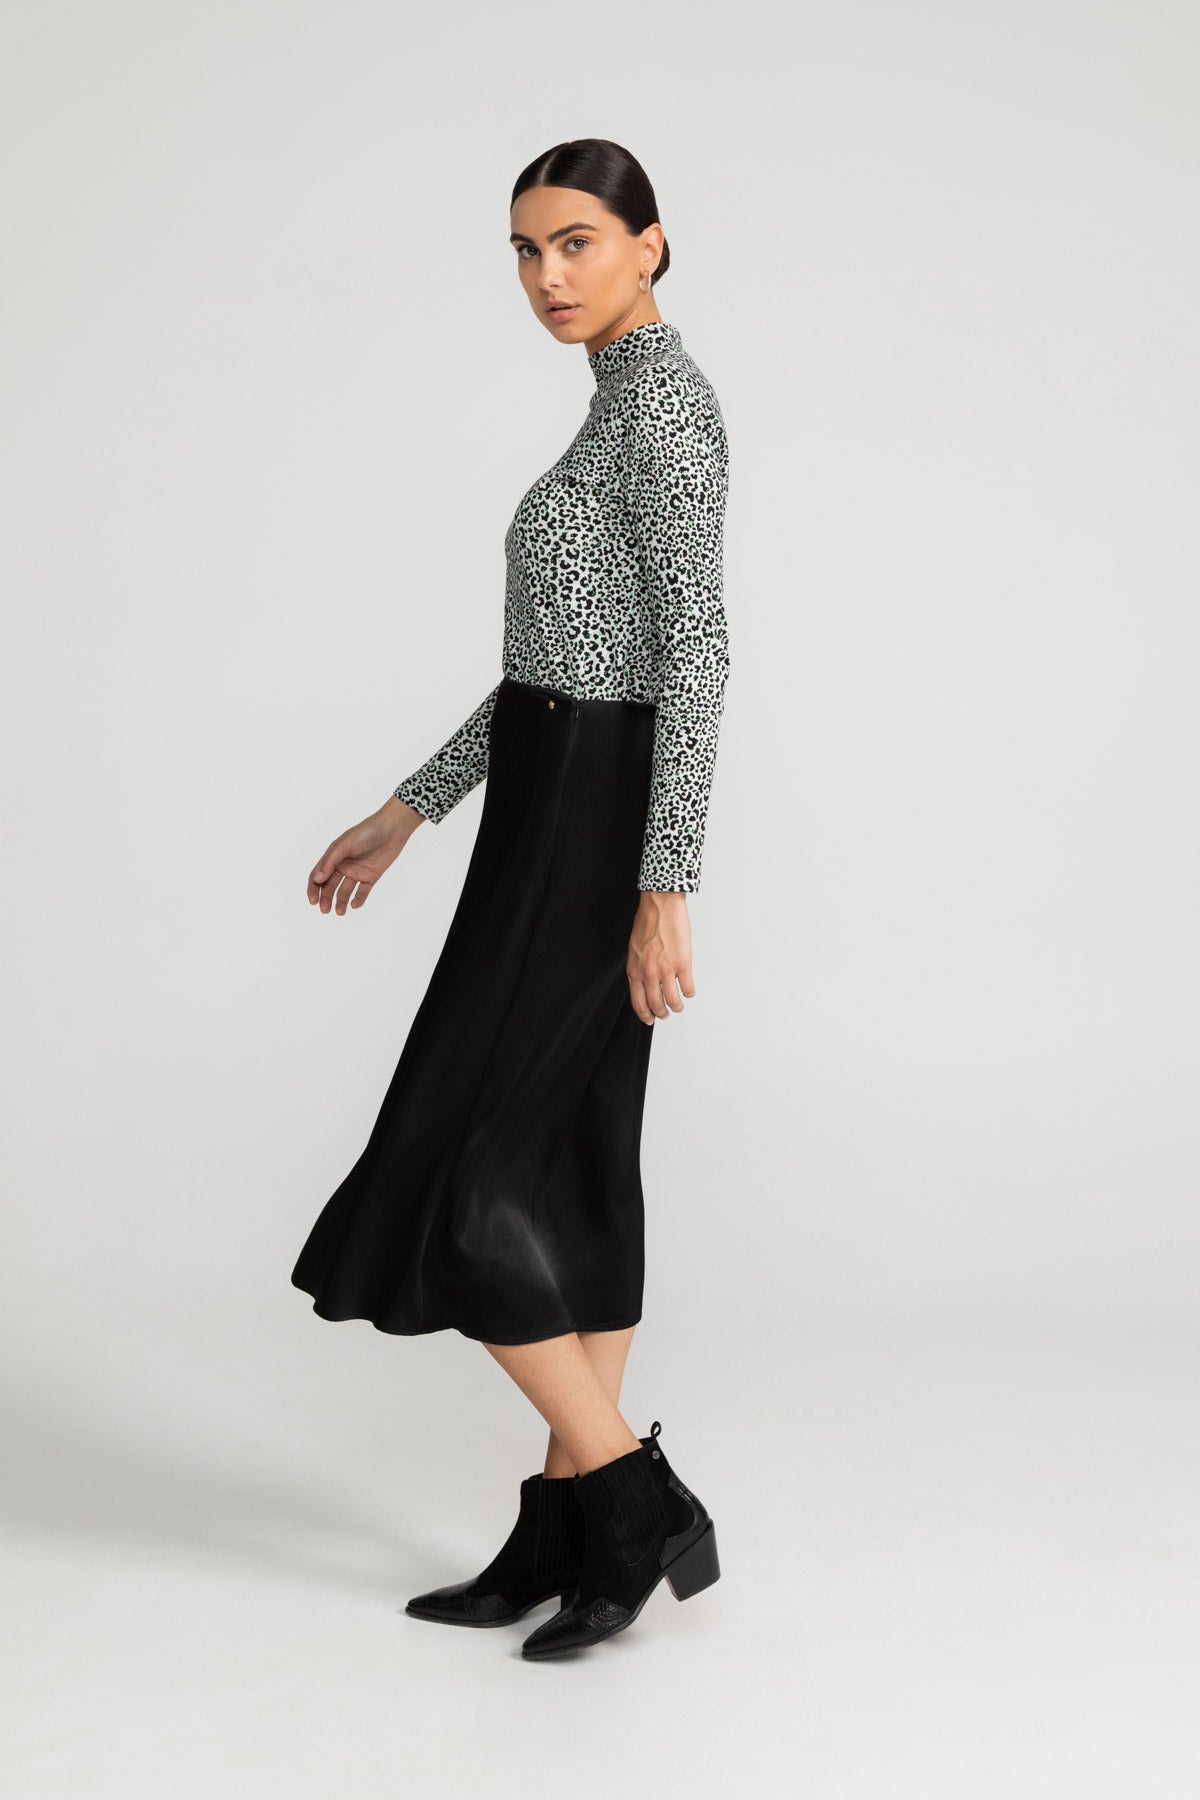 Skirt LEONNE in black by LOVJOI made from sustainable ENKA® viscose and Ecovero™